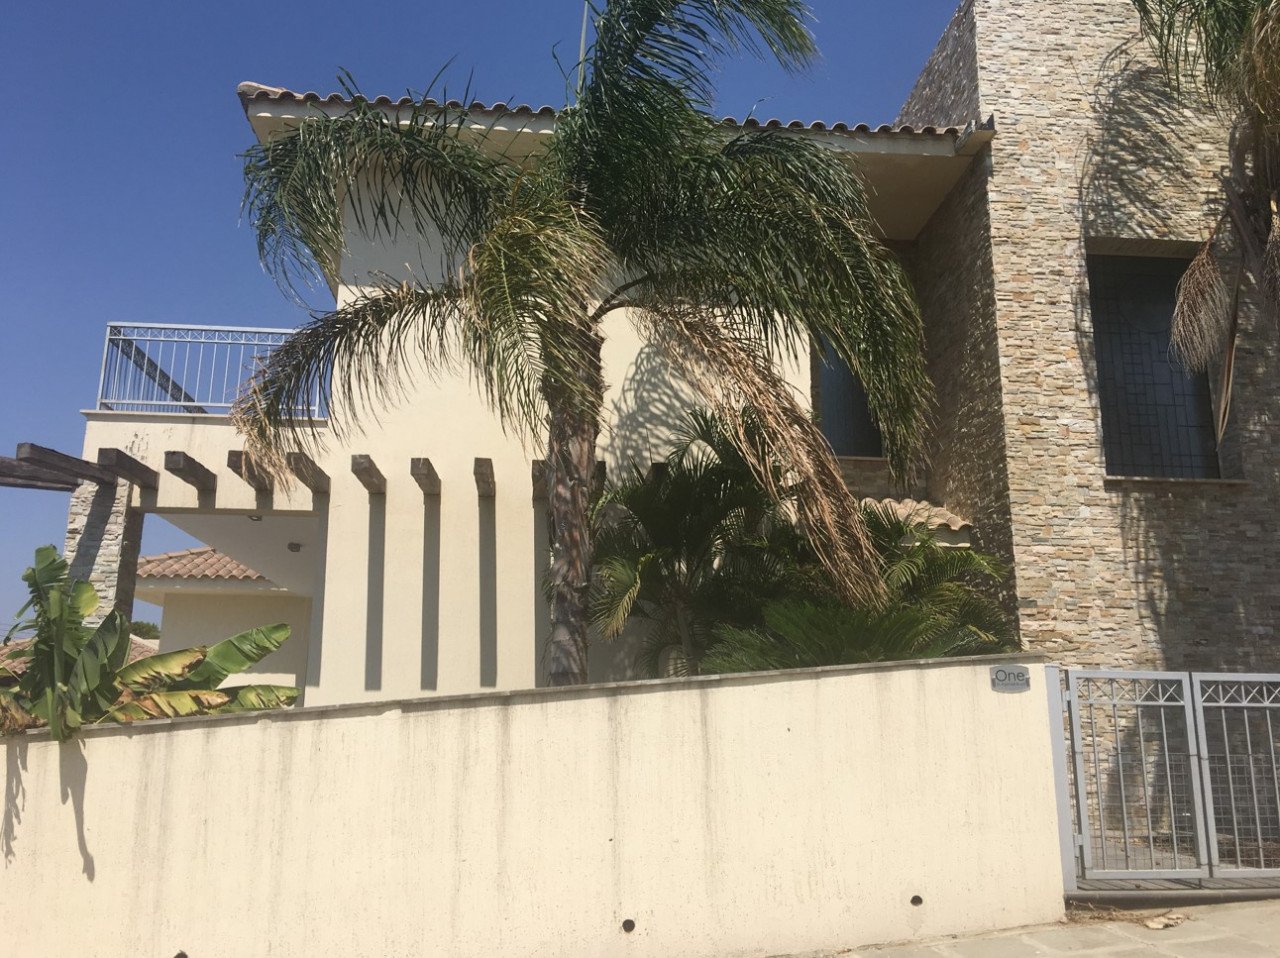 Property for Rent: House (Detached) in Paramali, Limassol for Rent | Key Realtor Cyprus